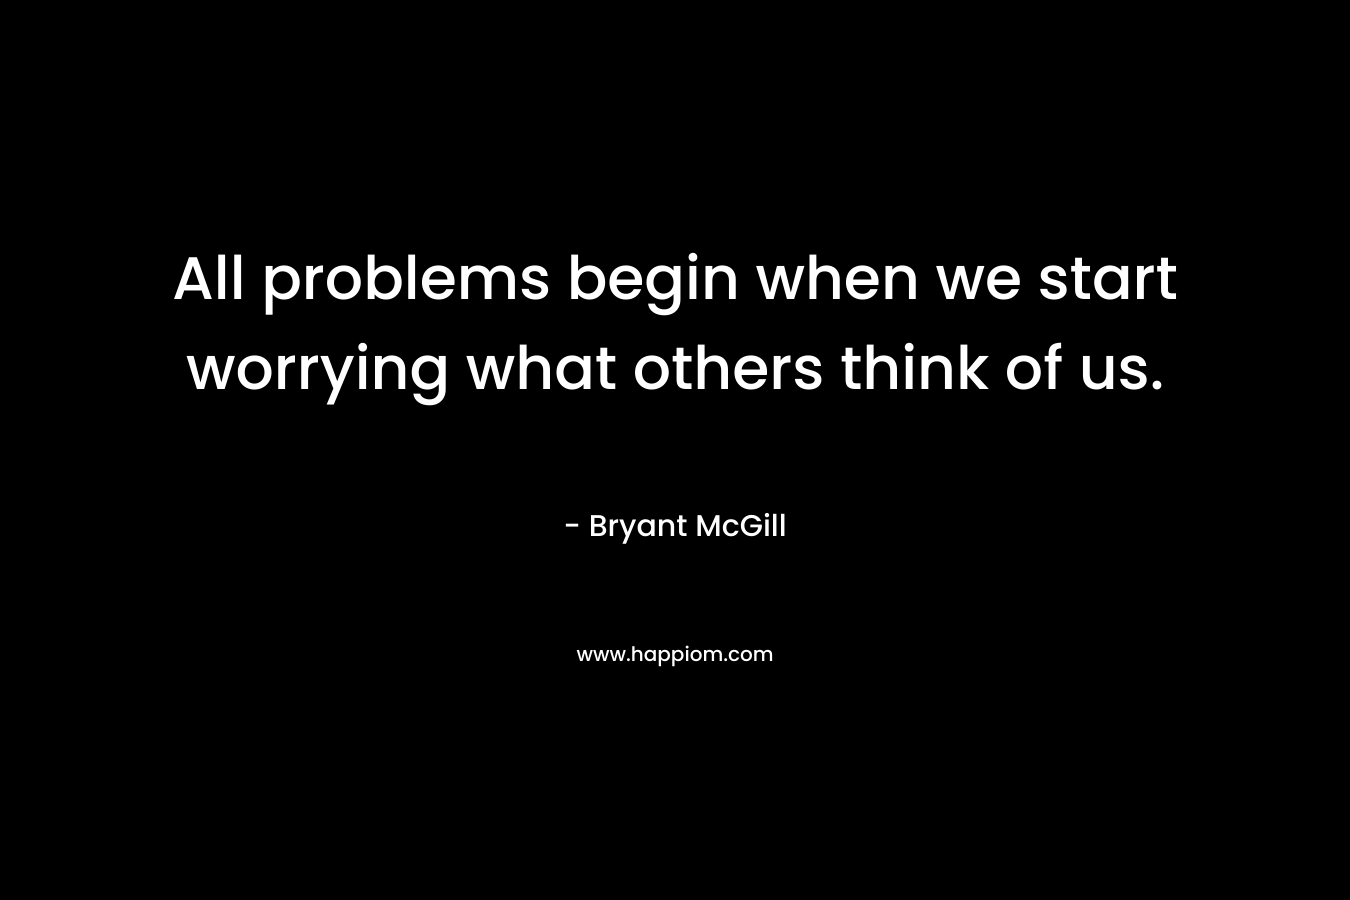 All problems begin when we start worrying what others think of us.